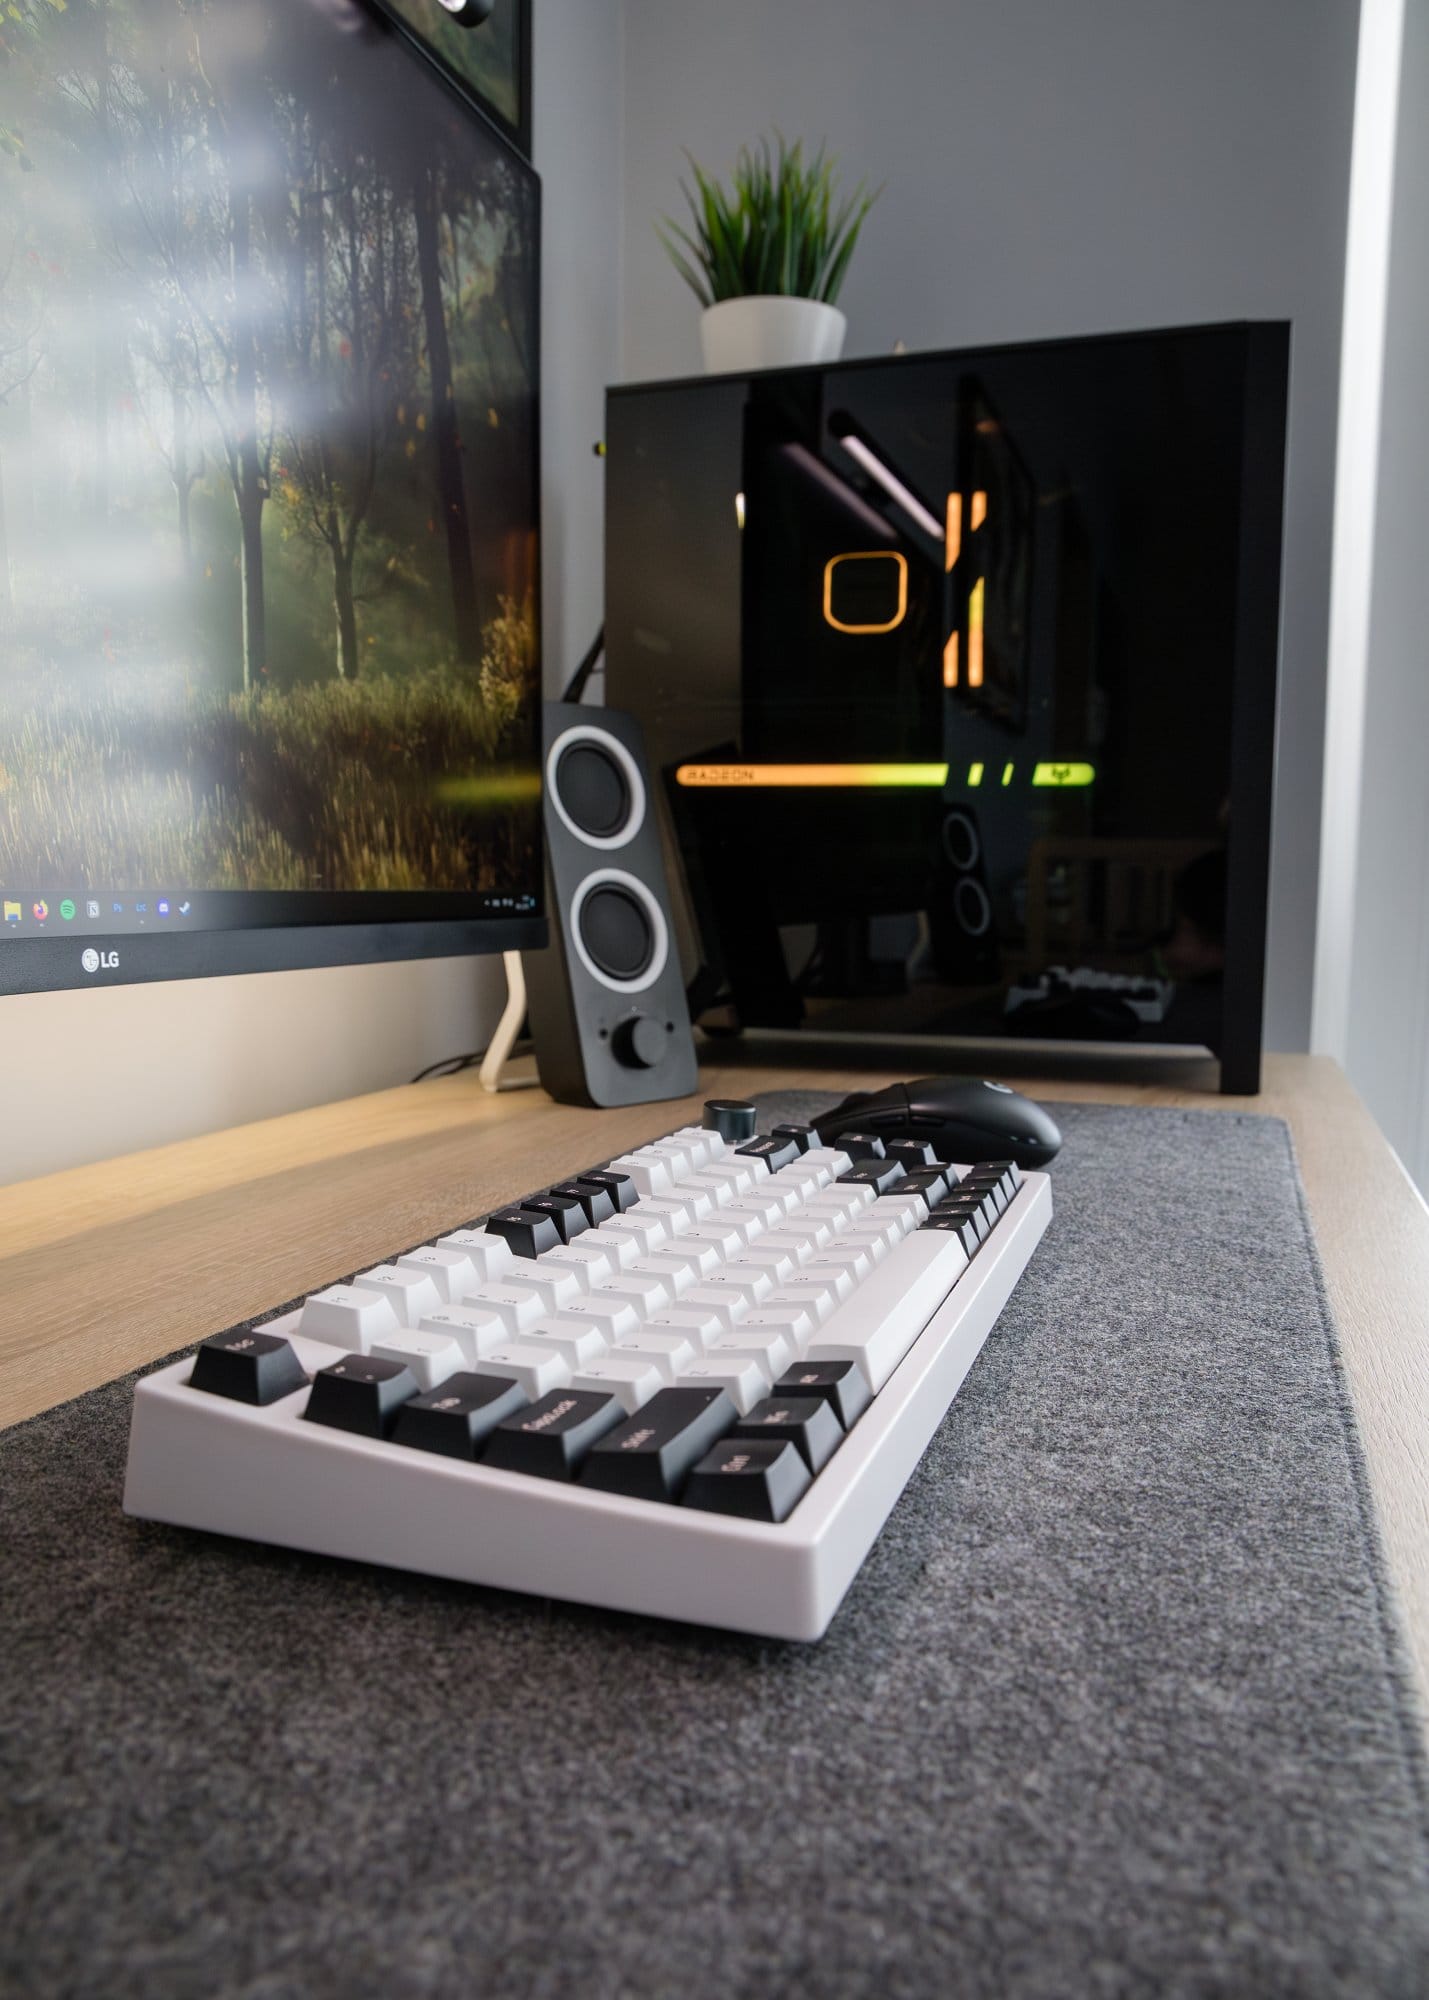 A focused view on an Epomaker mechanical keyboard with white keys on a desk mat, with a gaming mouse to the side, and in the background, a monitor and a high-end PC tower with LED lighting